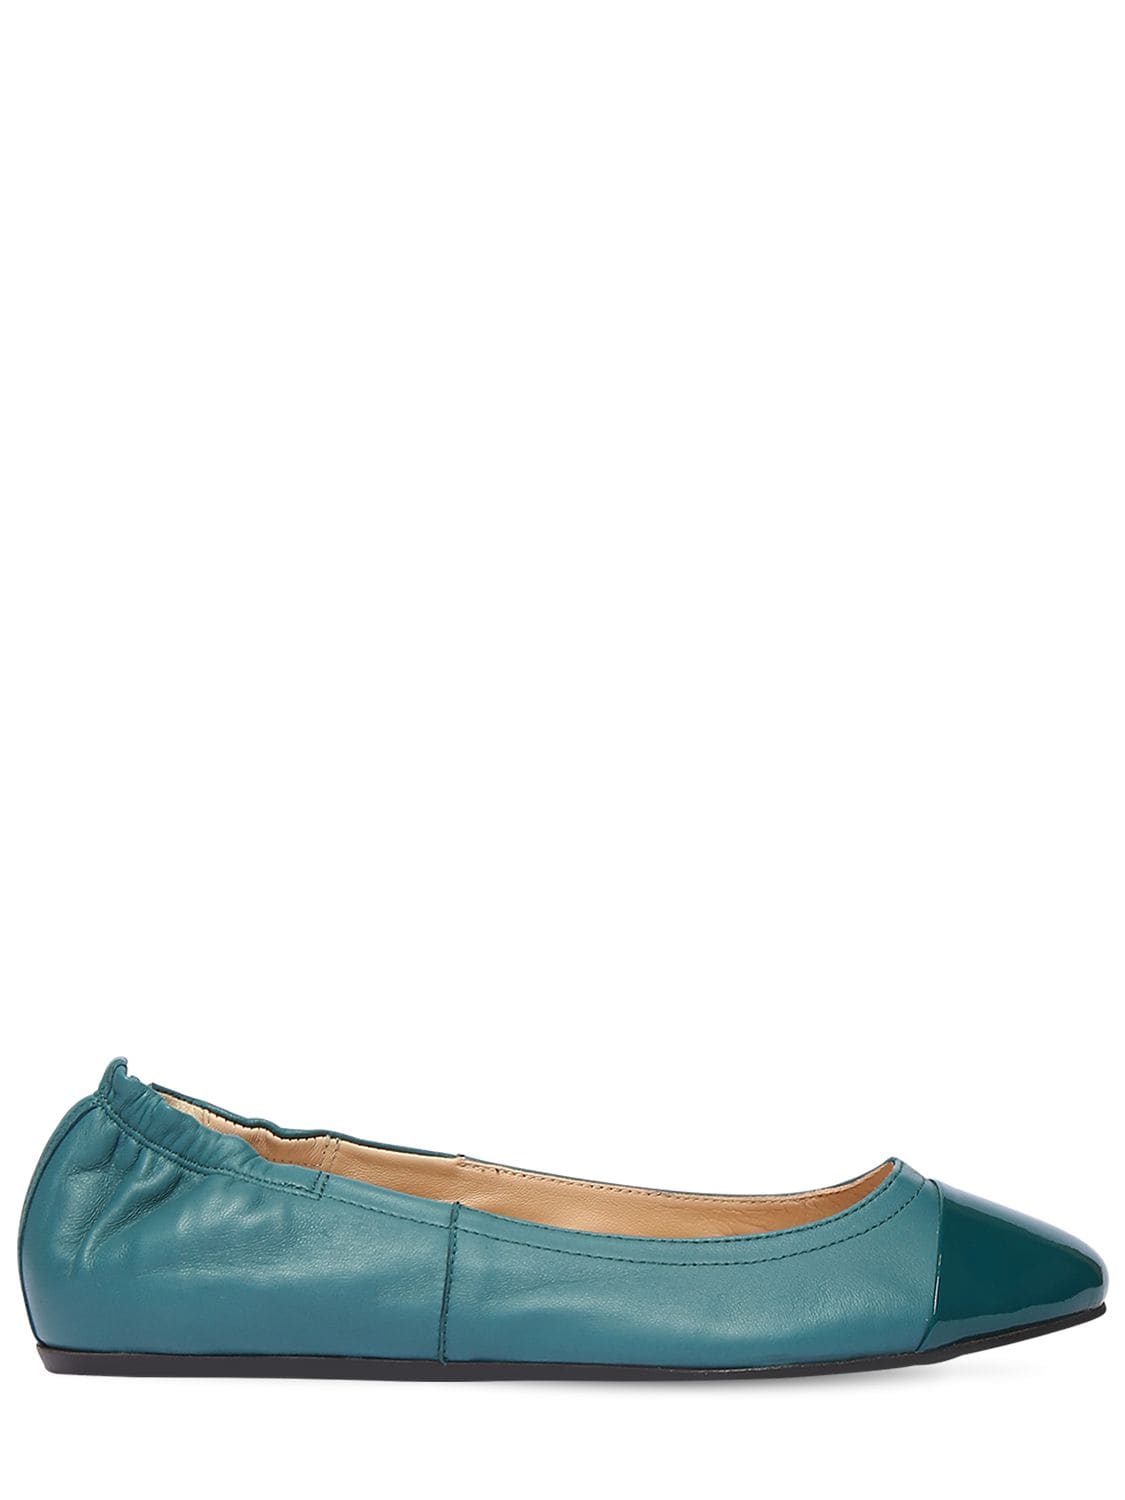 Lanvin 10mm Leather & Patent Ballerinas In Green